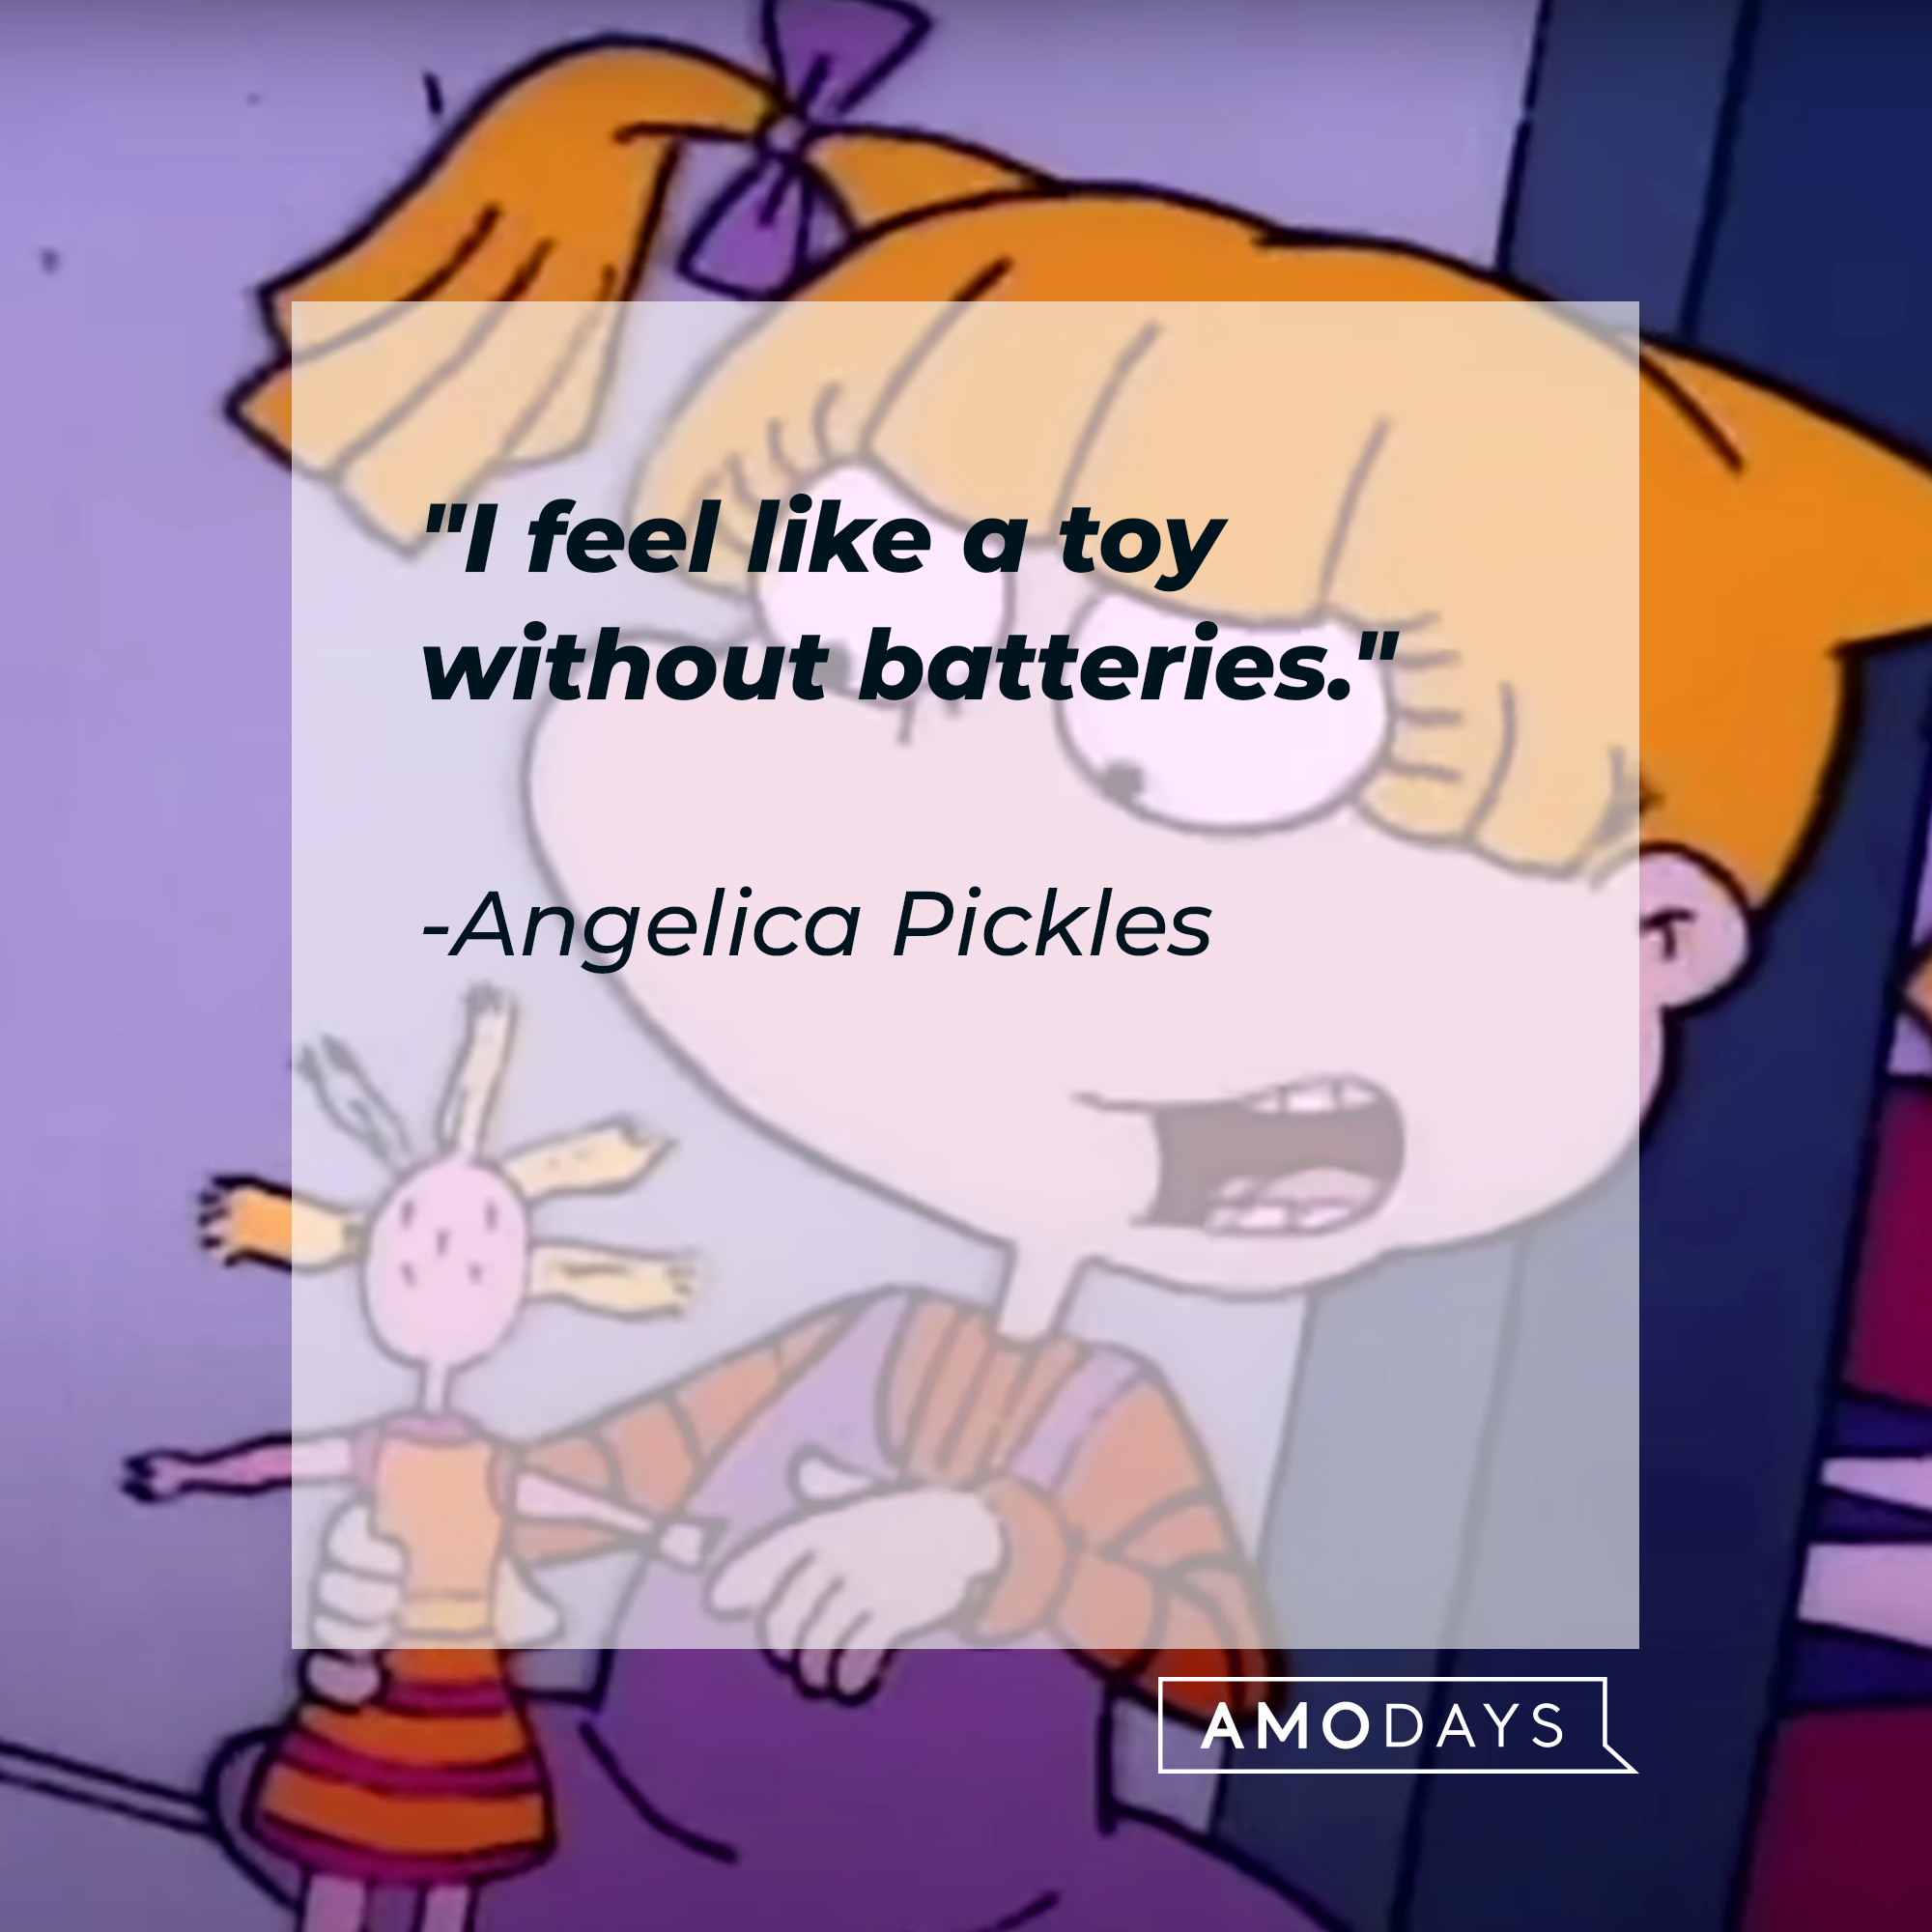 Angelica Pickles’ quote: "I feel like a toy without batteries." | Source: Facebook/Rugrats